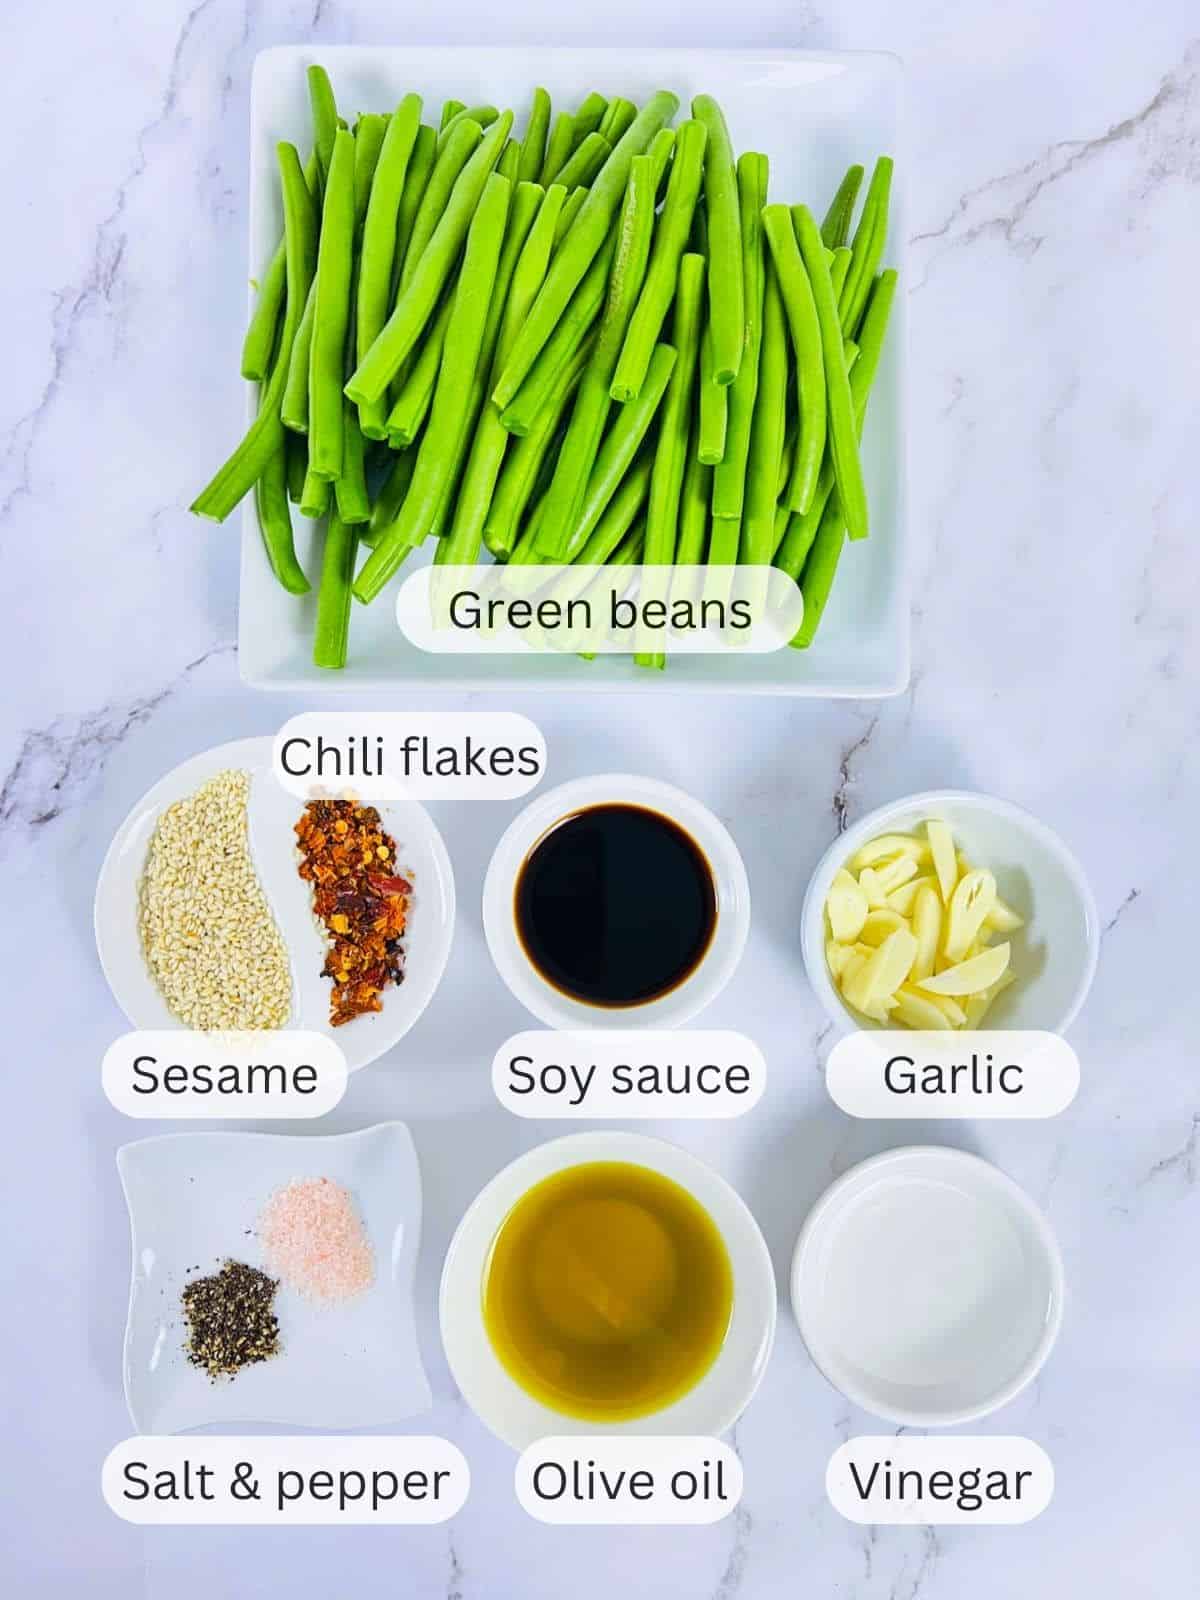 Ingredients to make air fryer green beans placed on a marbel background.